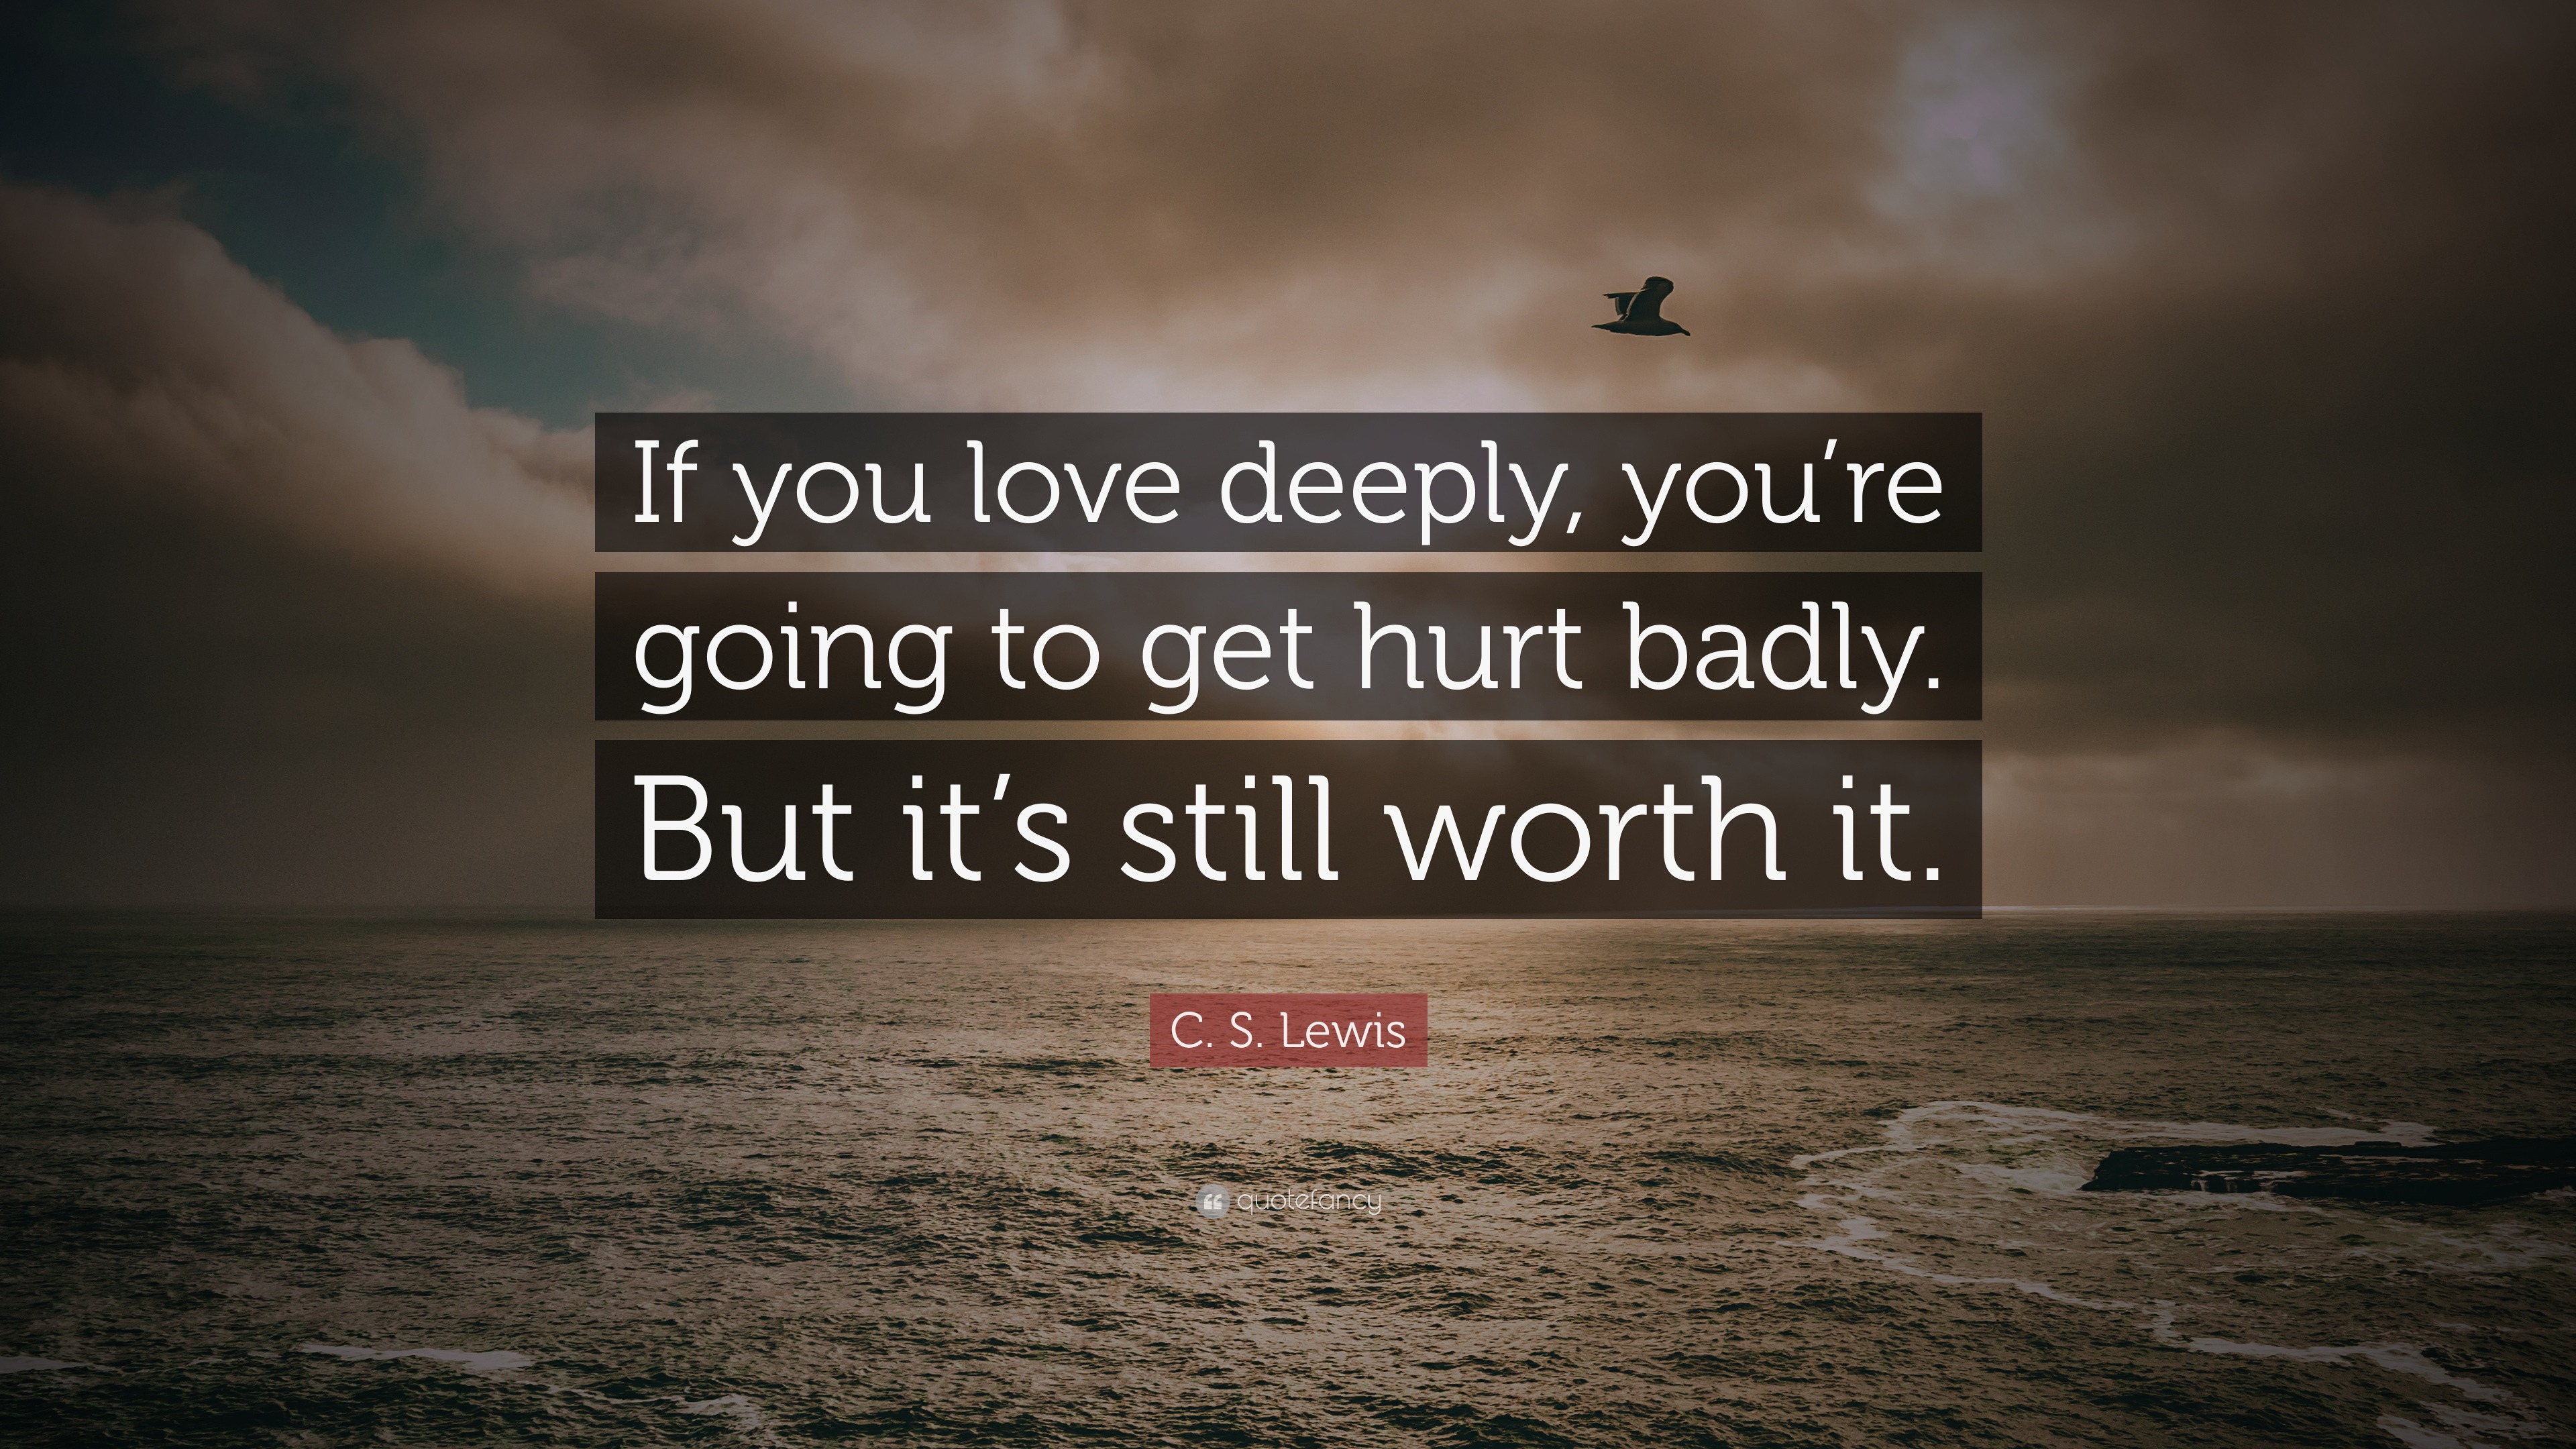 When Someone You Love Hurts You Deeply Quotes - popularquotesimg